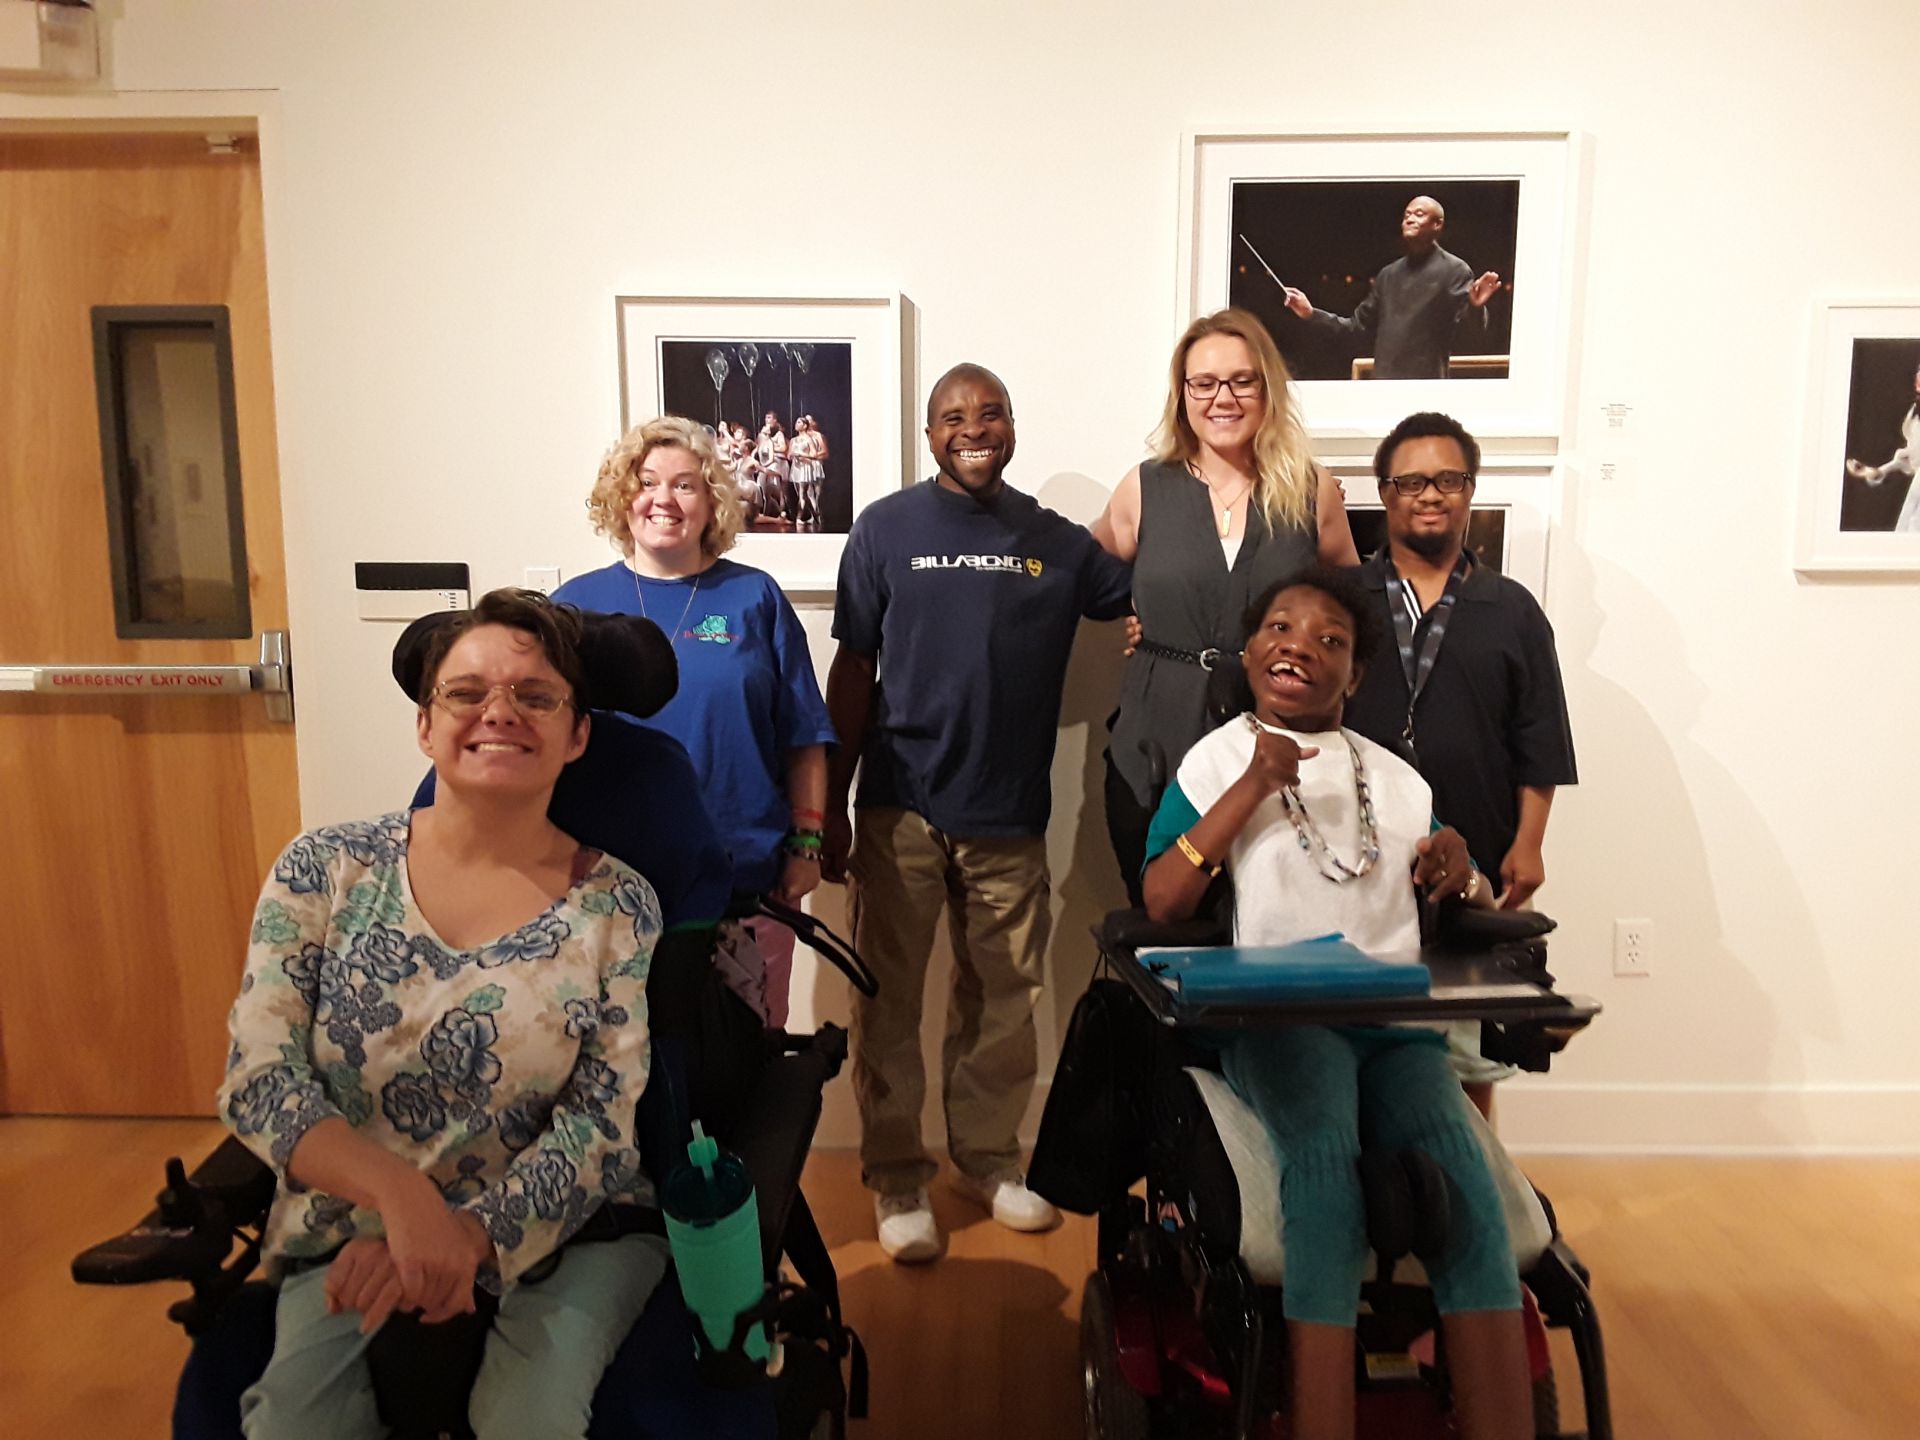 group of people at gallery exhibit